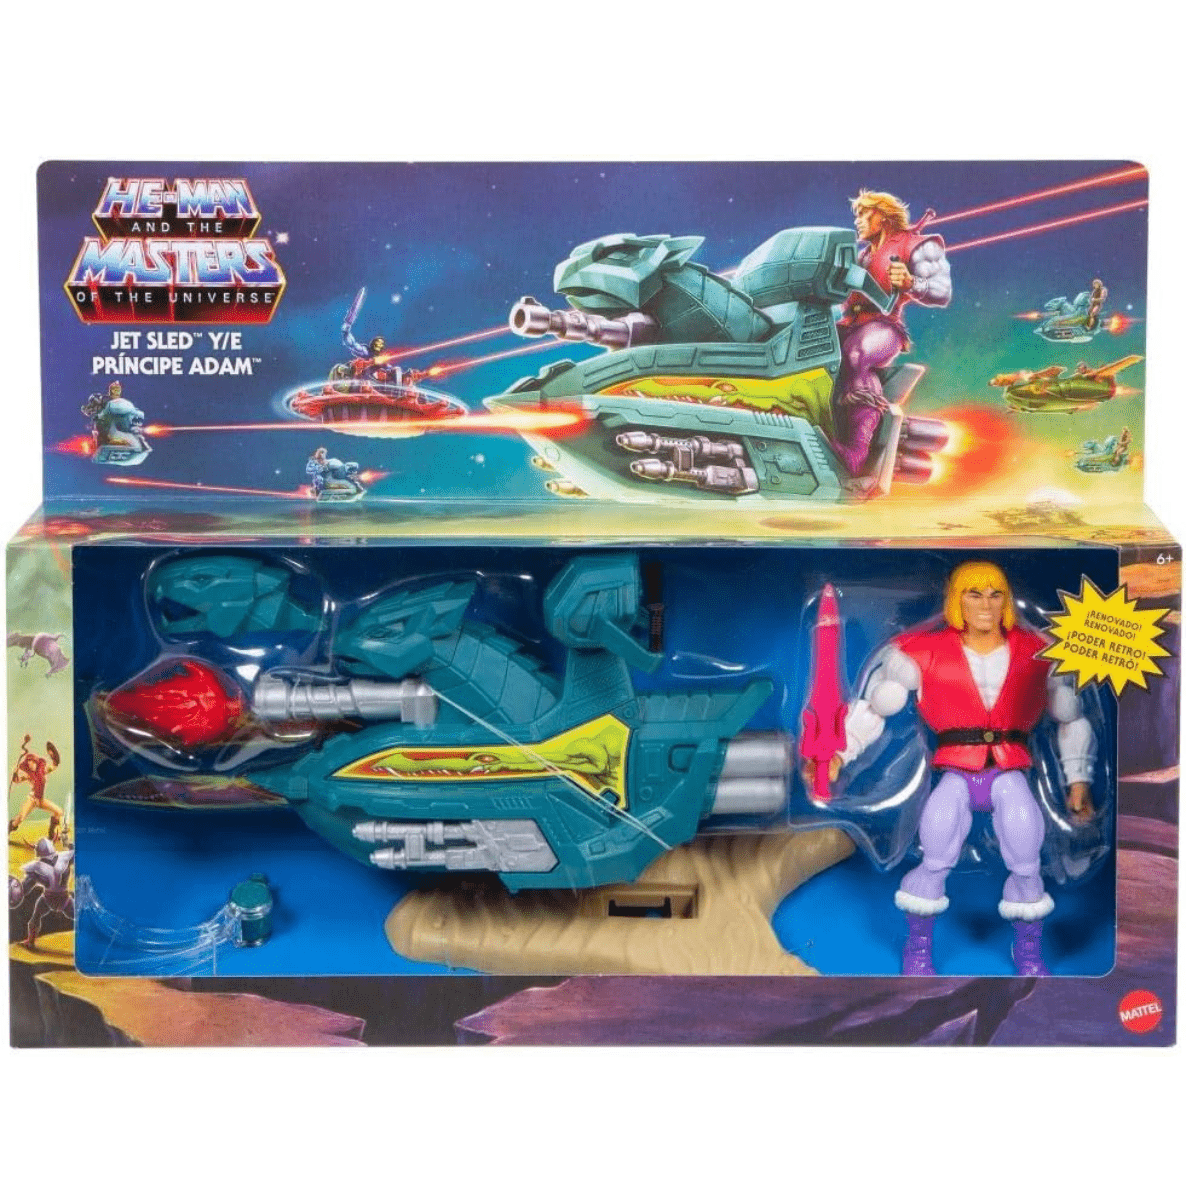 Master of the universe - Prince Adam Sky Sled